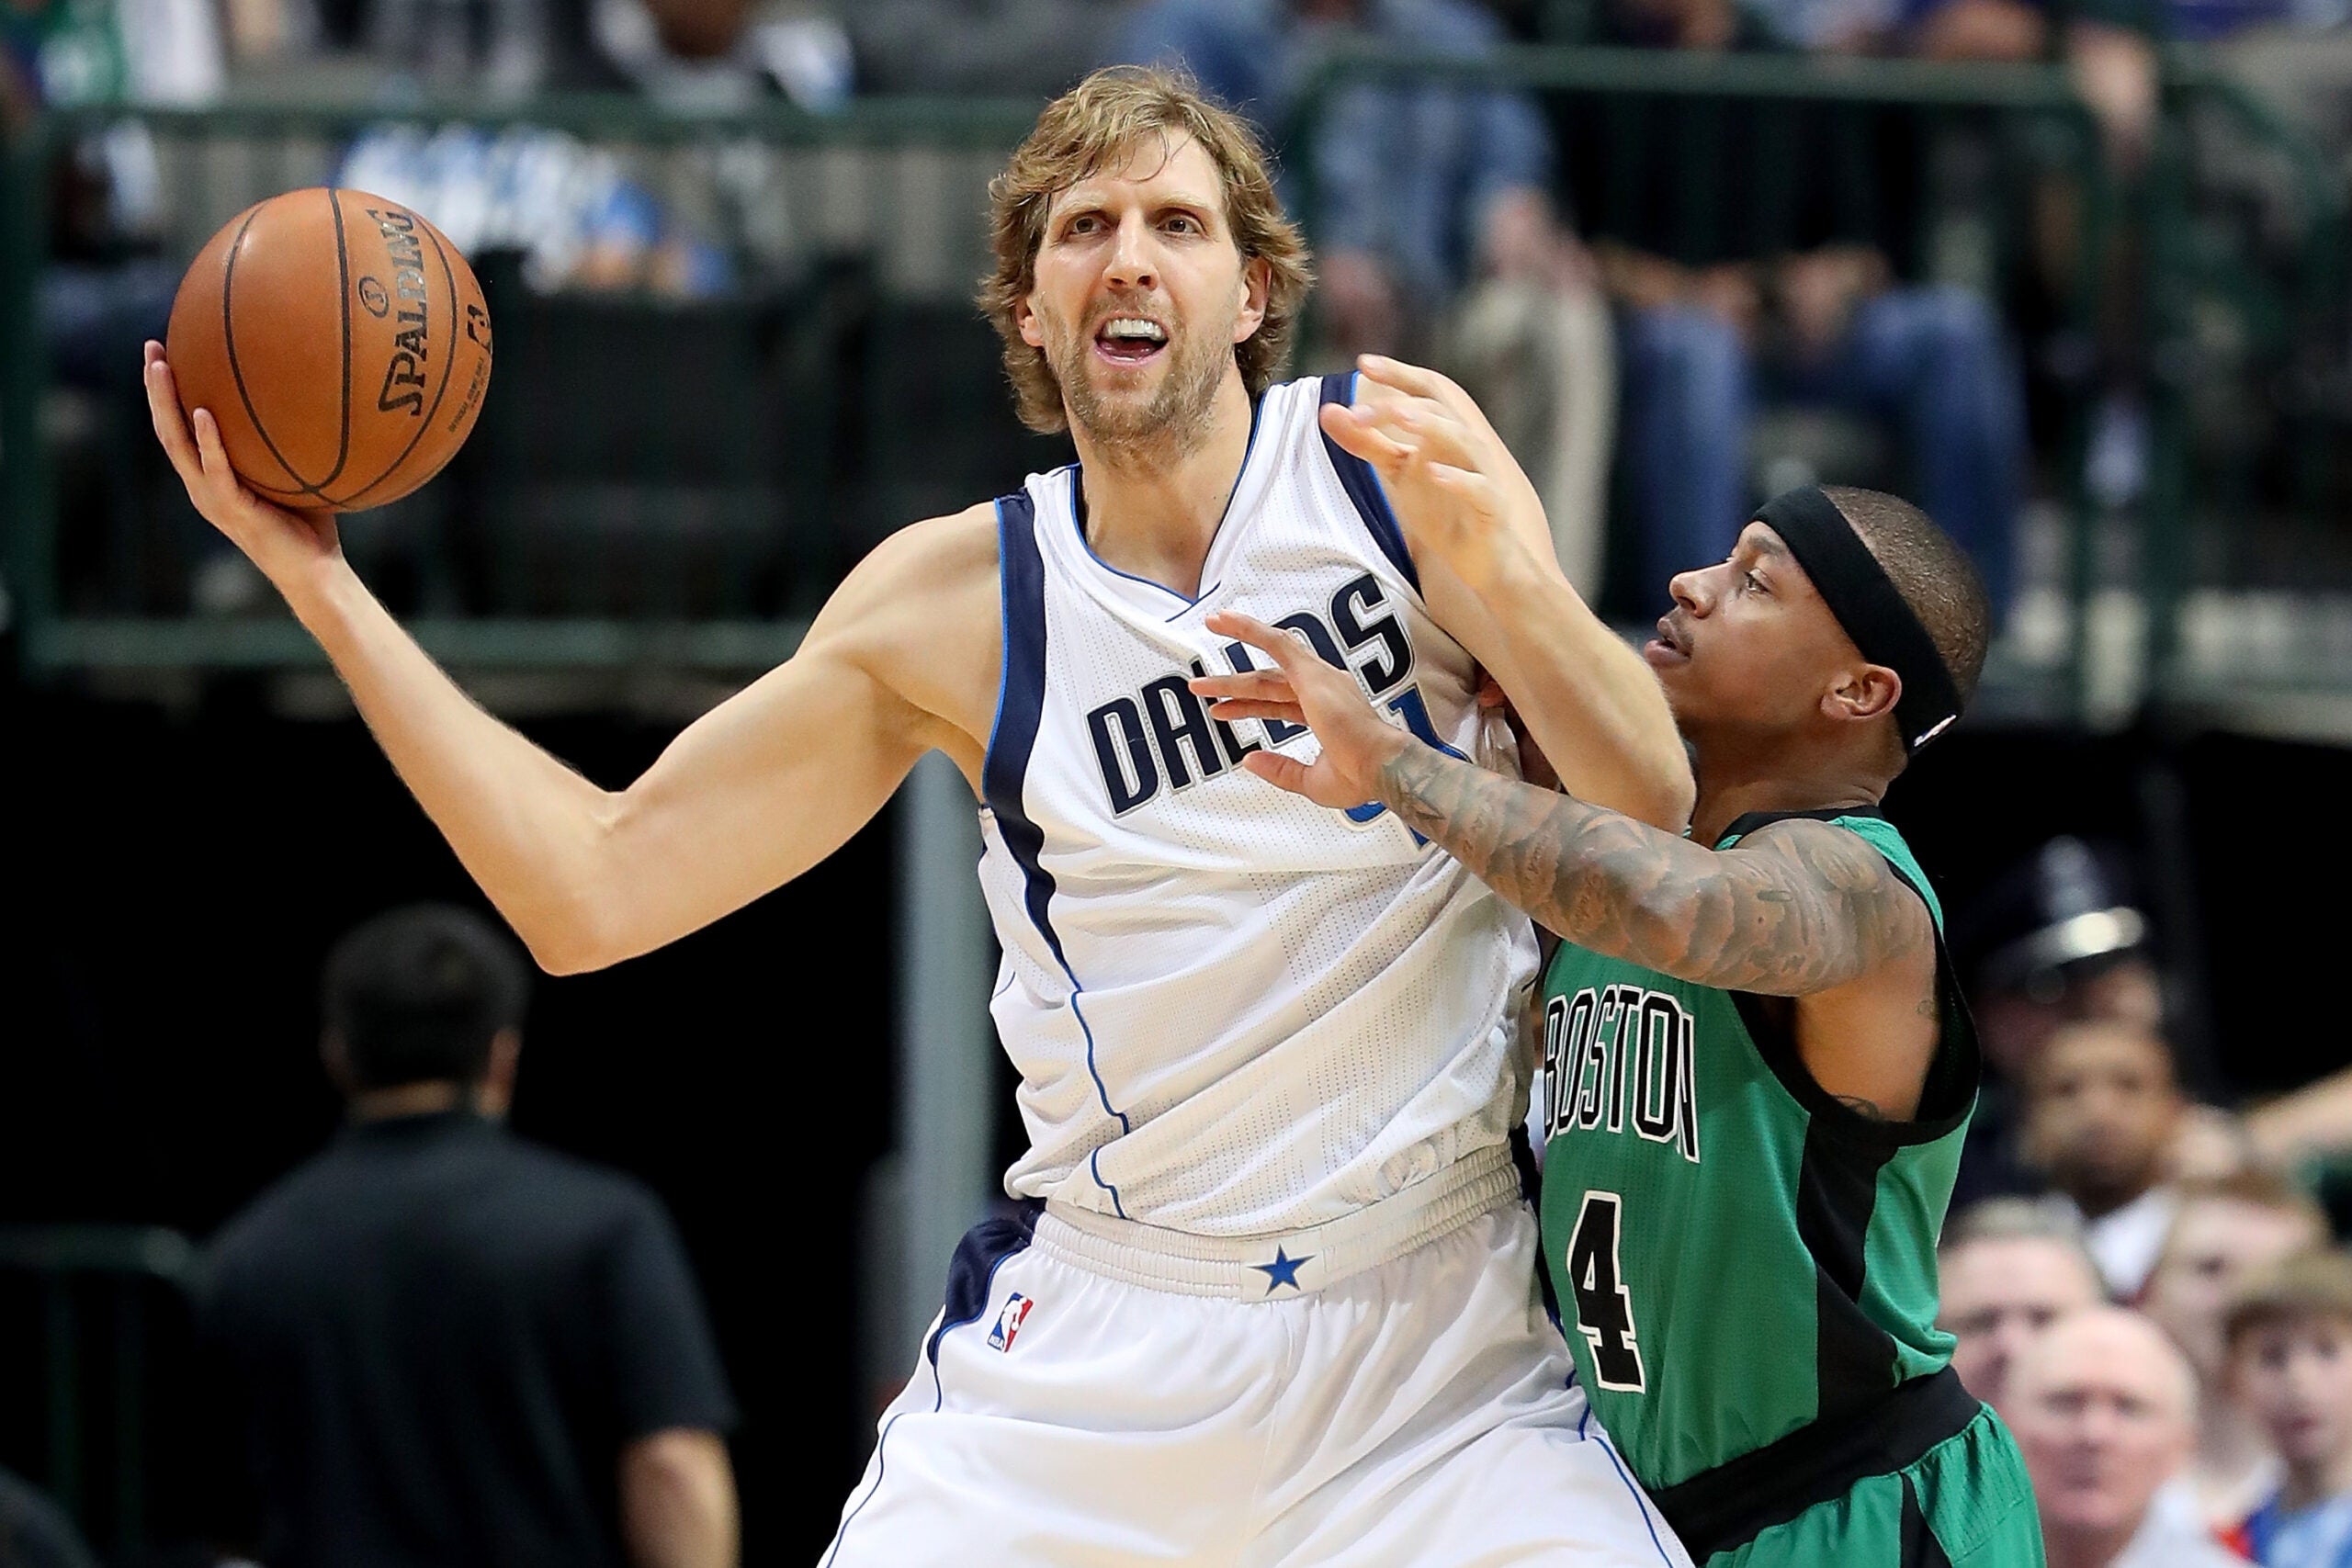 Dirk Nowitzki's March Toward History Has Just a Few More Steps